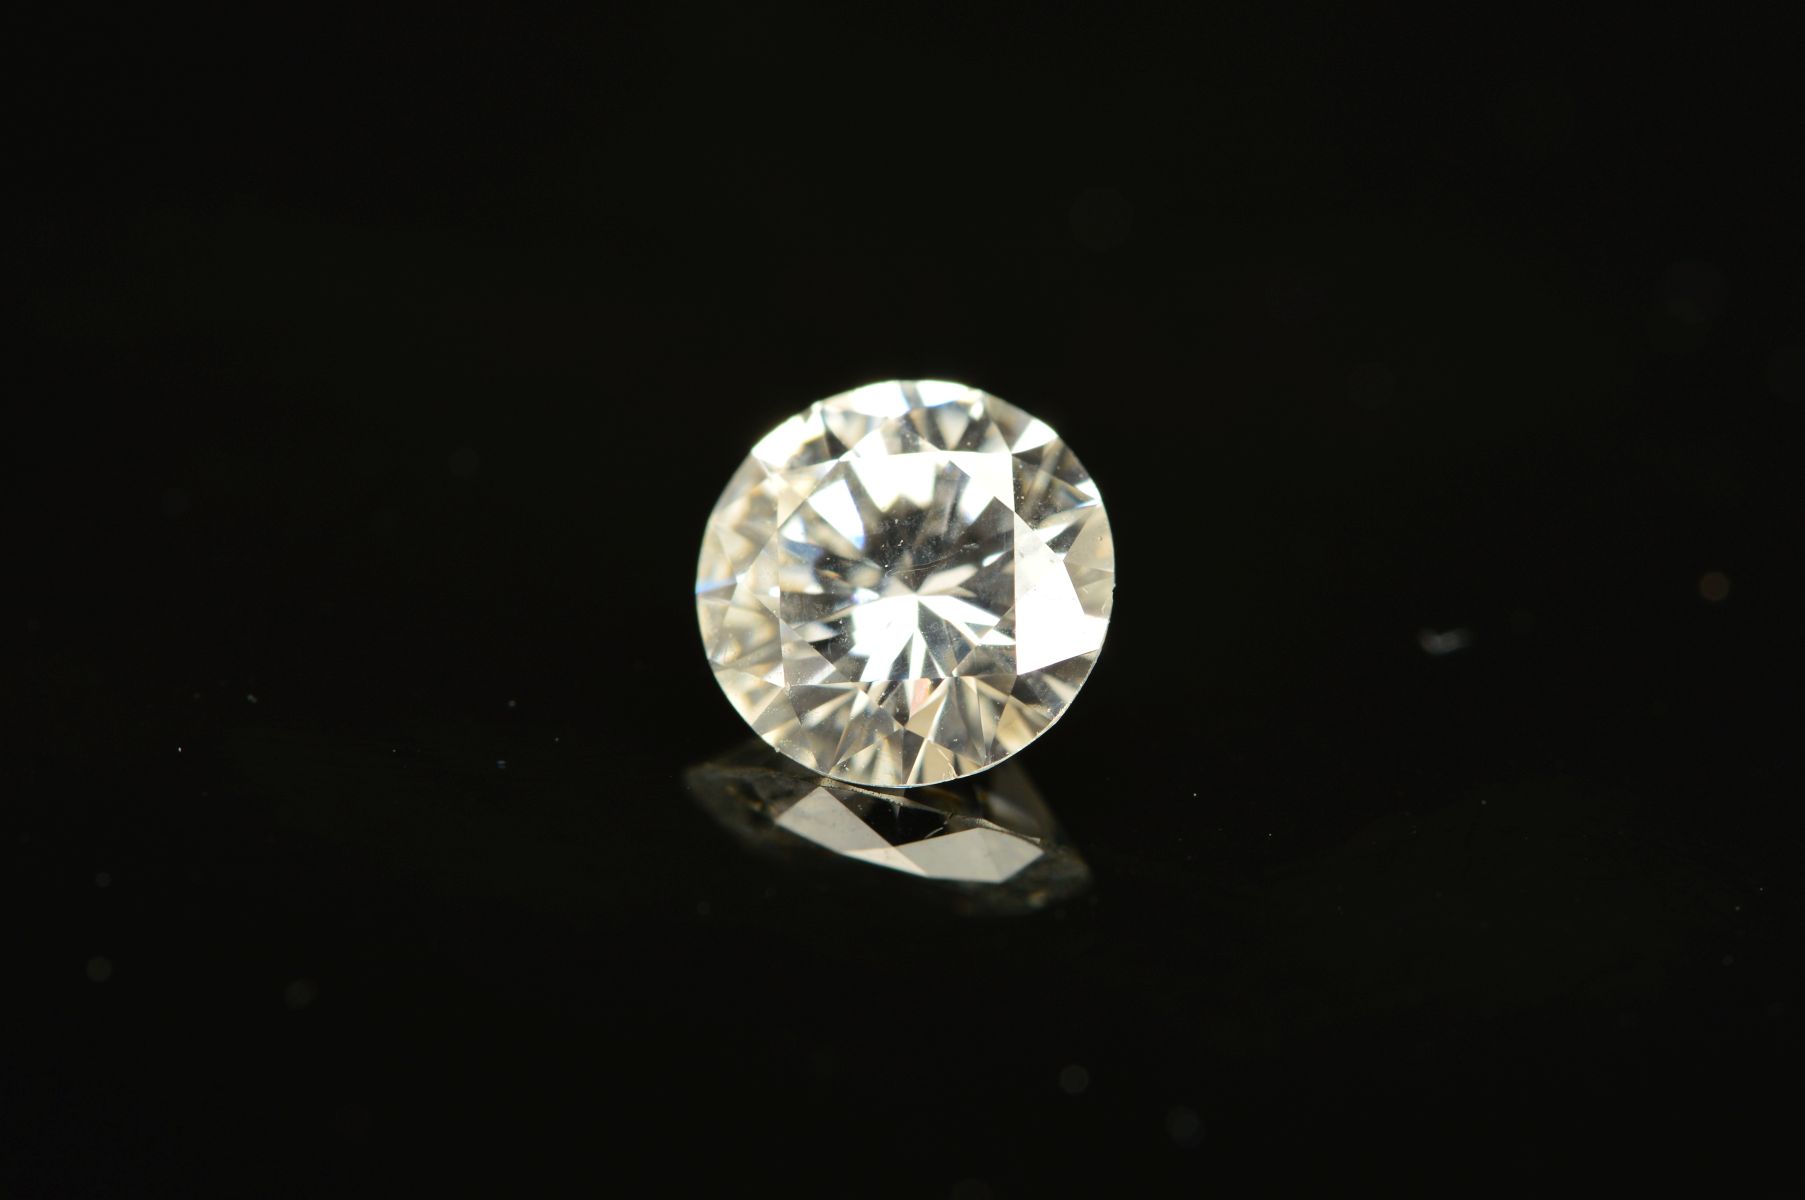 A BRILLIANT CUT DIAMOND, approximately 0.51ct, clarity assessed as VS1-VS2, colour assessed as E-F